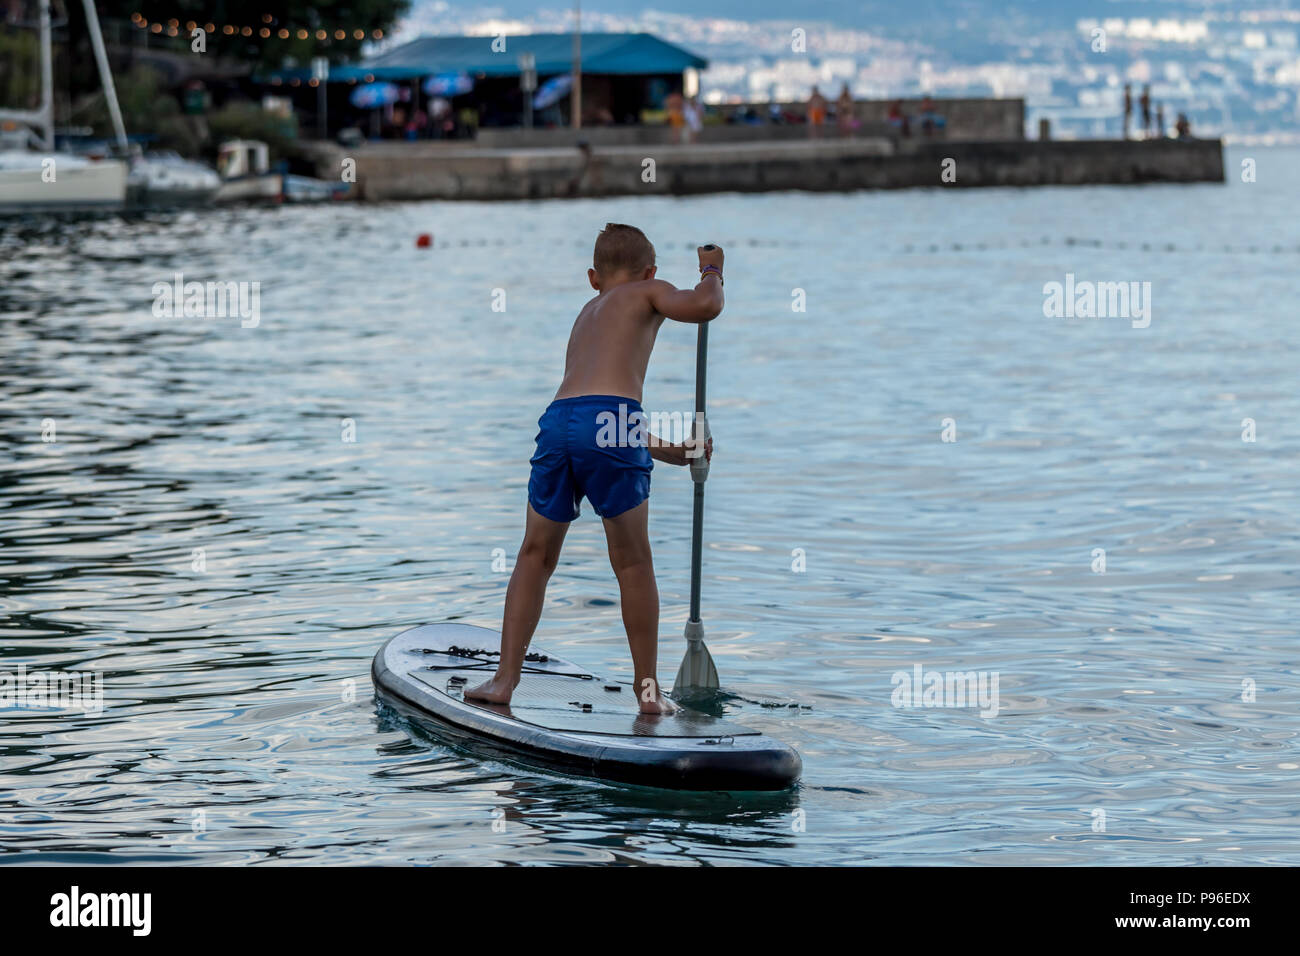 stand up paddle boarding on the sea Stock Photo